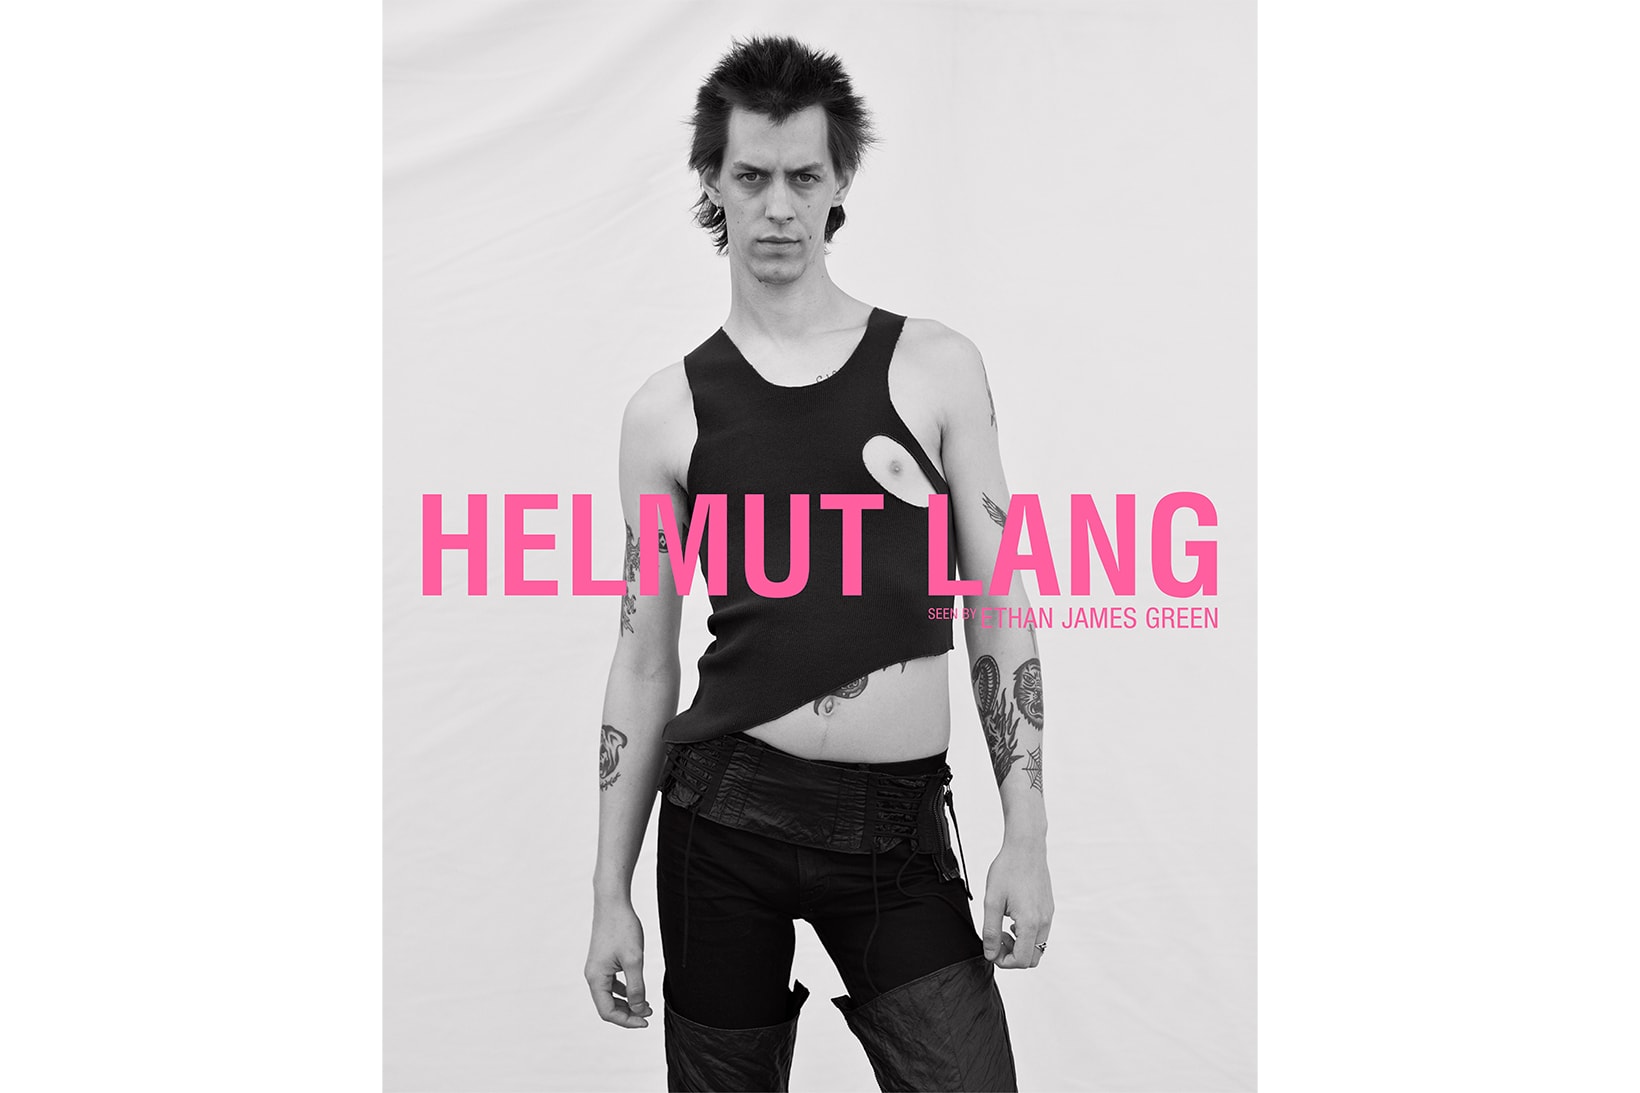 Helmut Lang 2017 Fall Winter Campaign Ethan James Green Shayne Oliver YOSHI Traci Lords